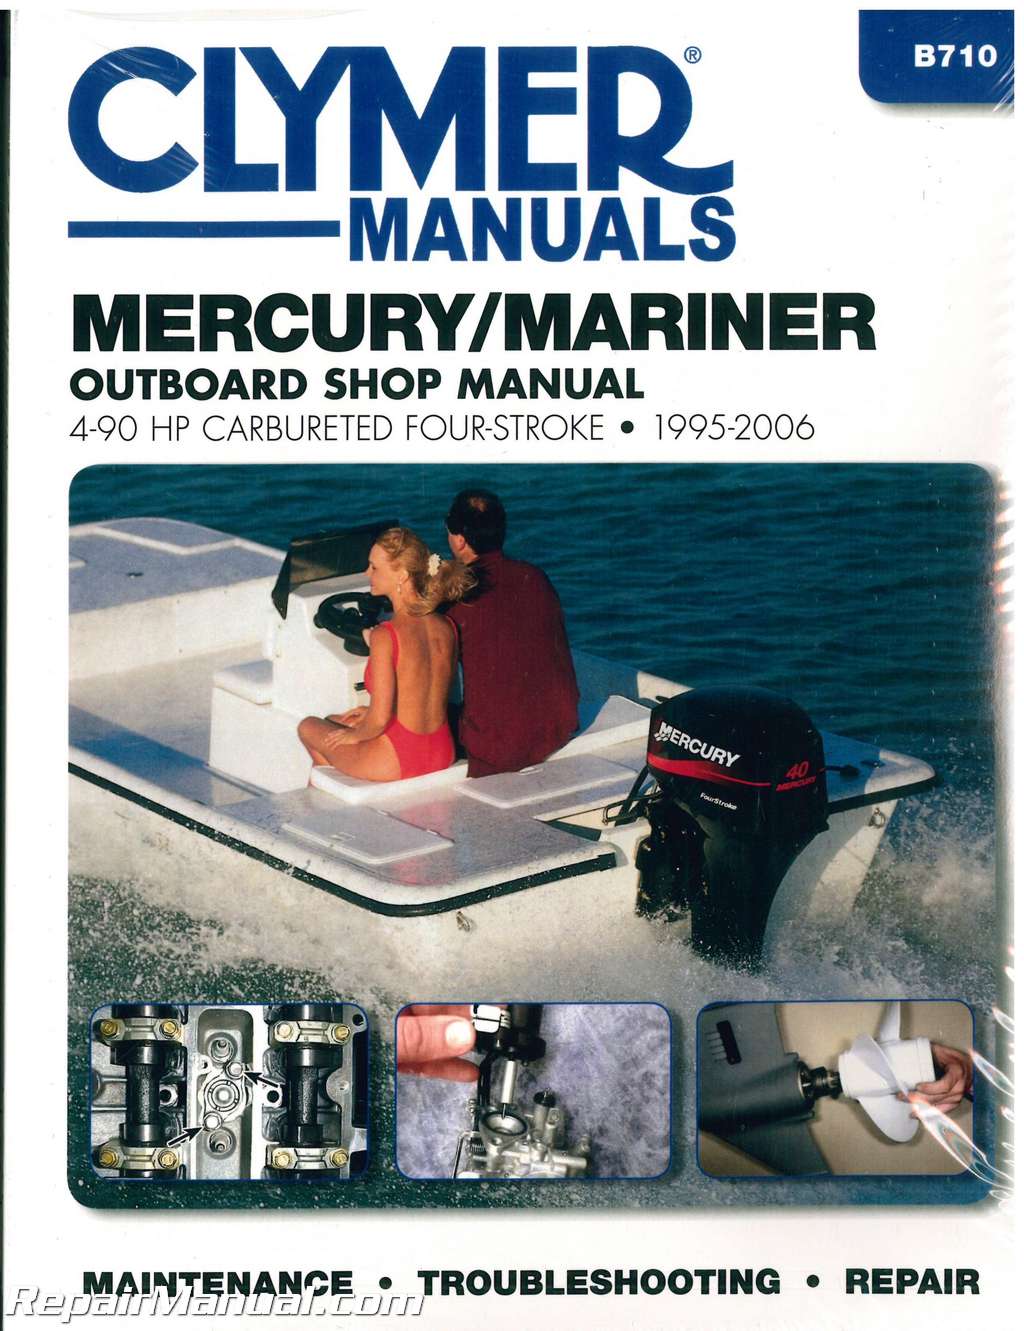 Mariner outboard service manual free download